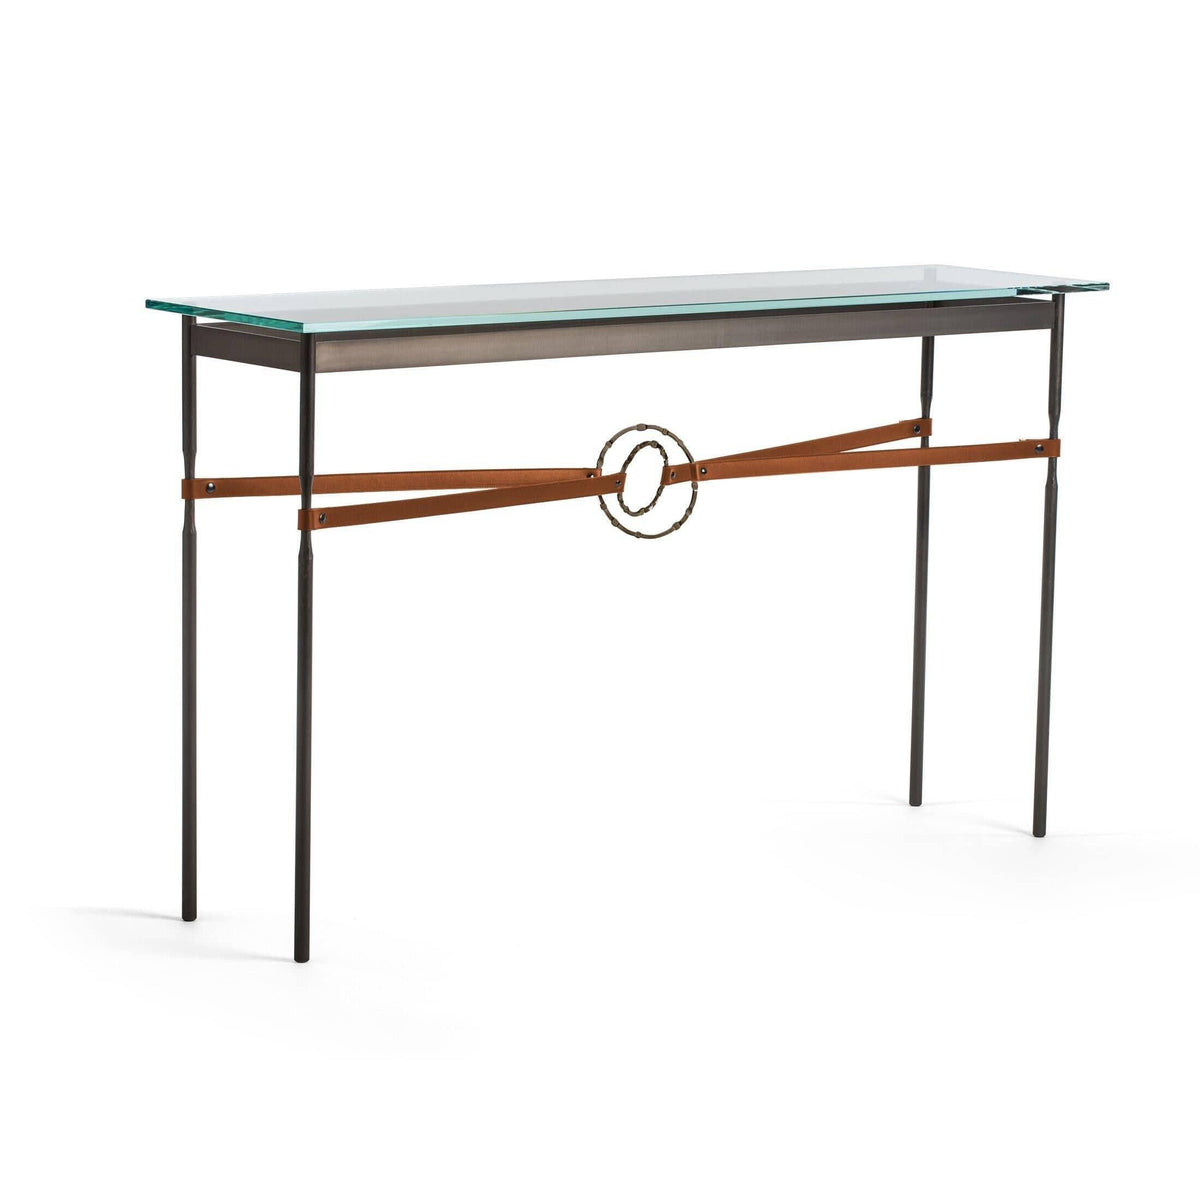 Hubbardton Forge - Equus Chestnut Leather Console Table - 750118-07-05-LC-VA0714 | Montreal Lighting & Hardware